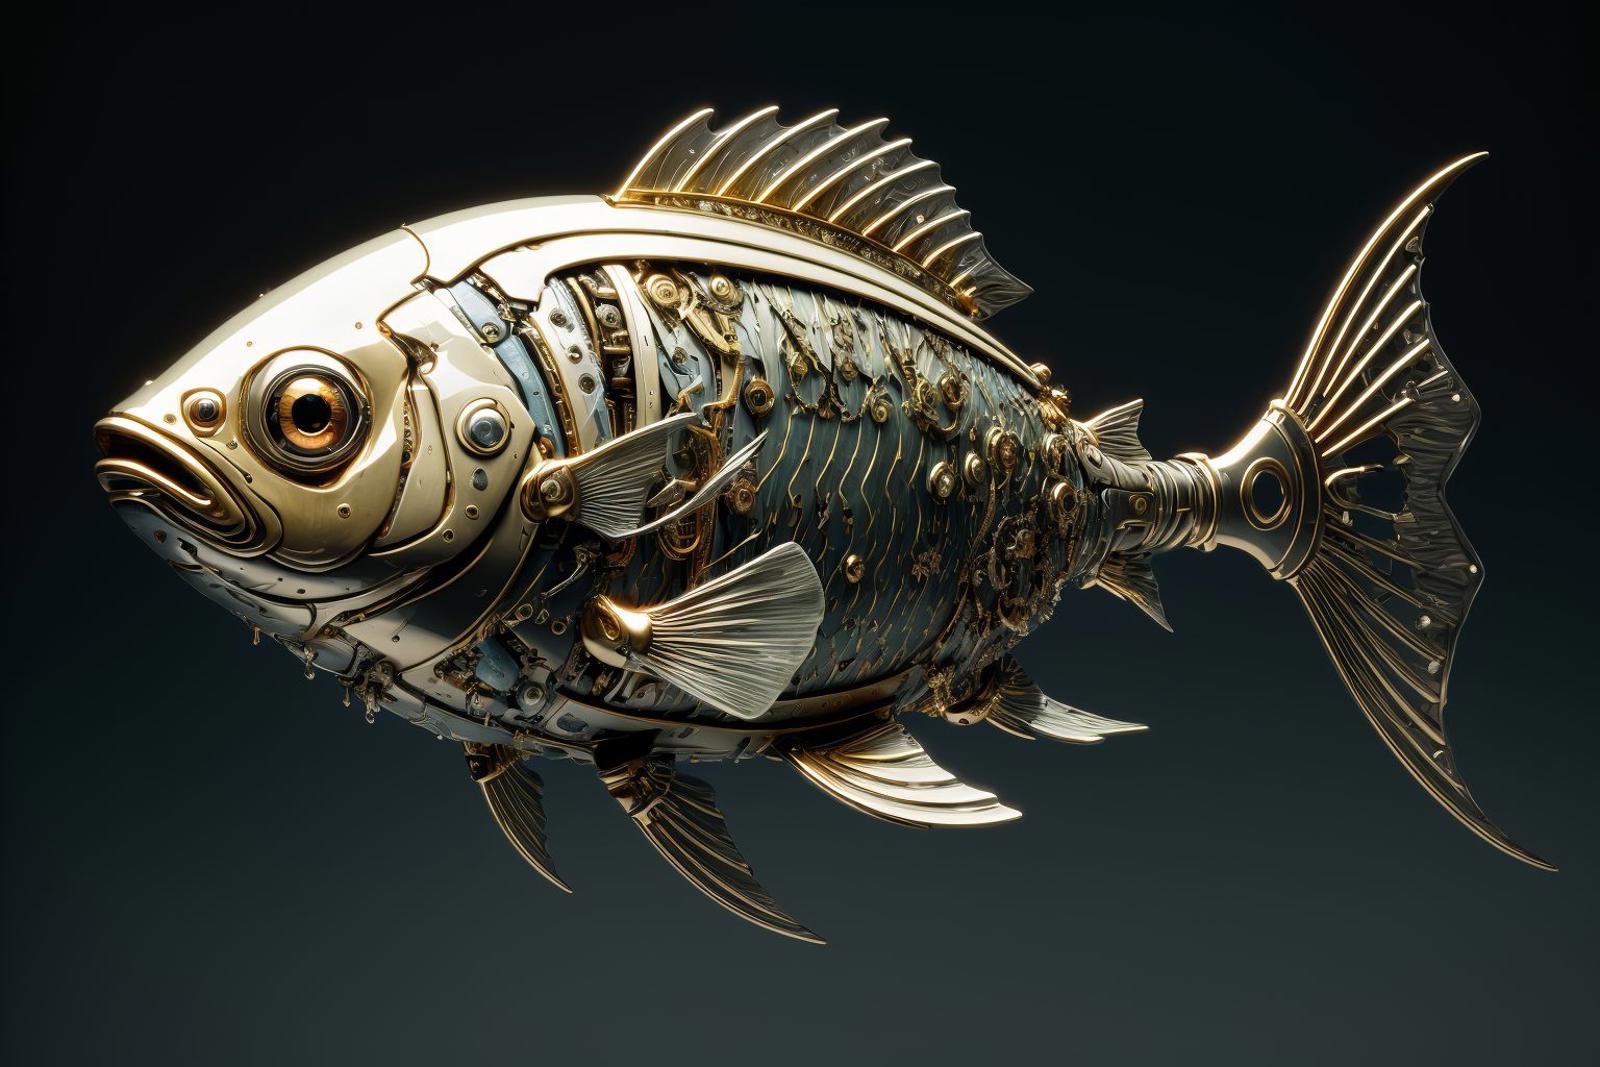 Mechanical fish image by ChaosOrchestrator